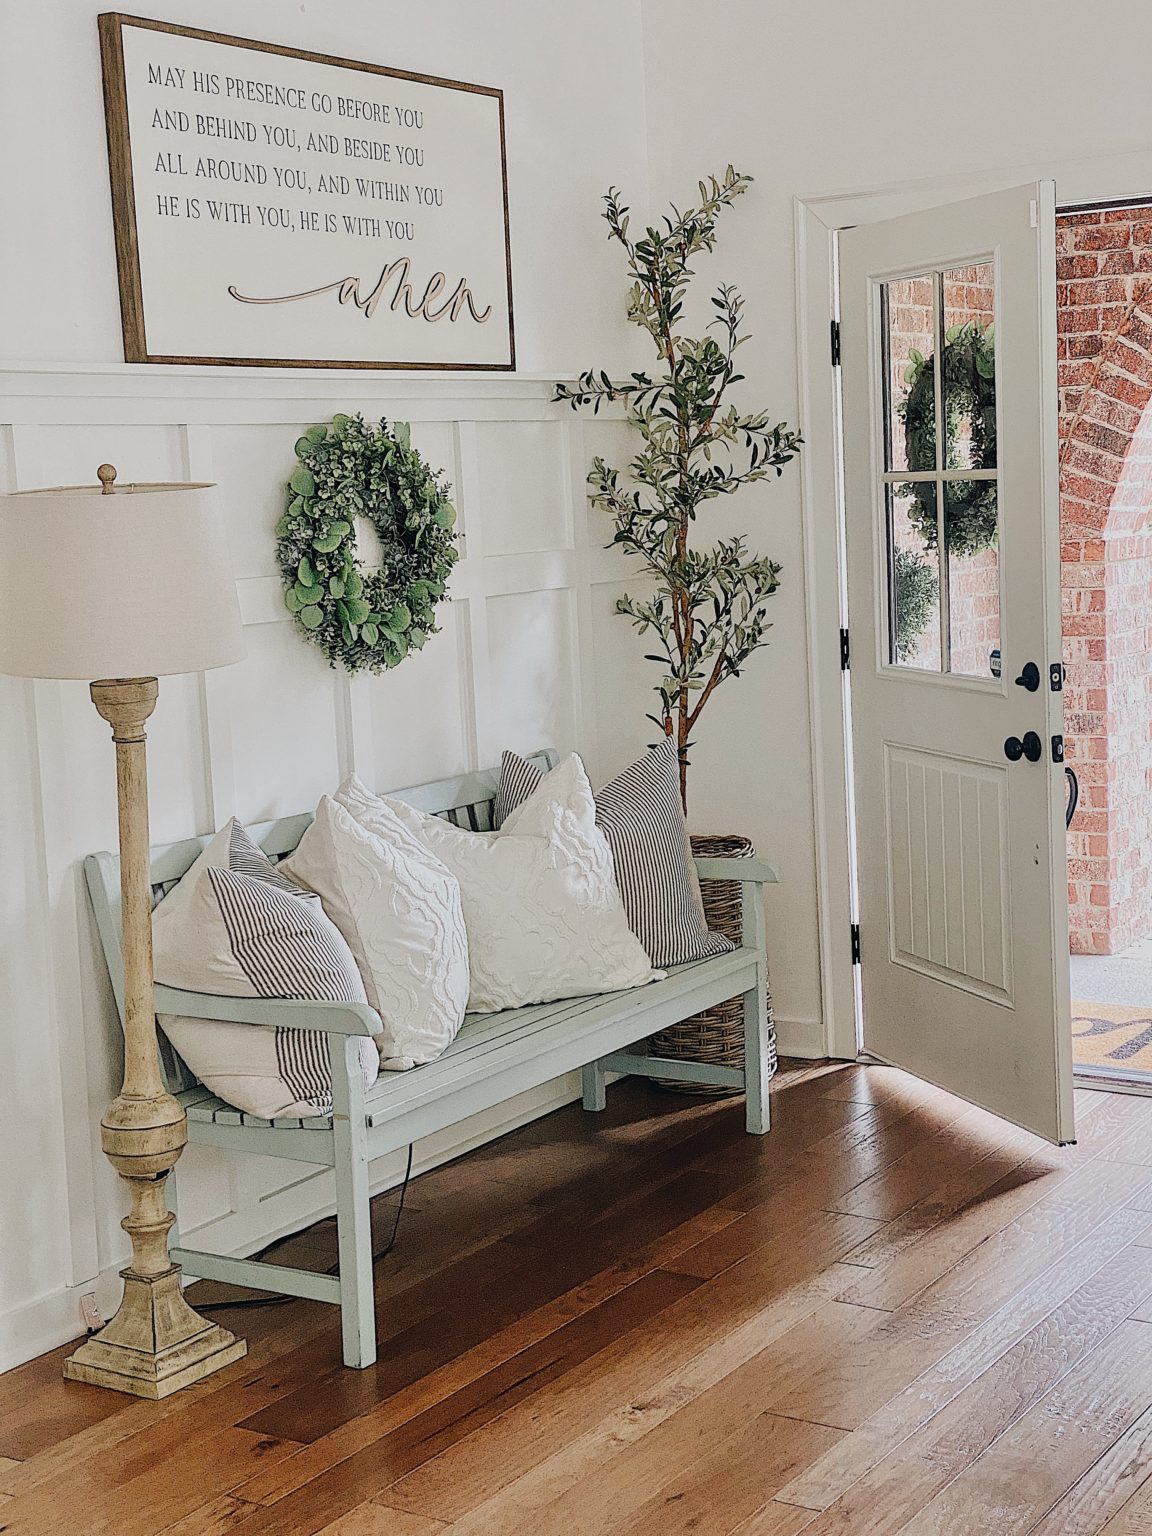 Summer Home Tour 2022: Entryway and Living Room | She Gave It A Go